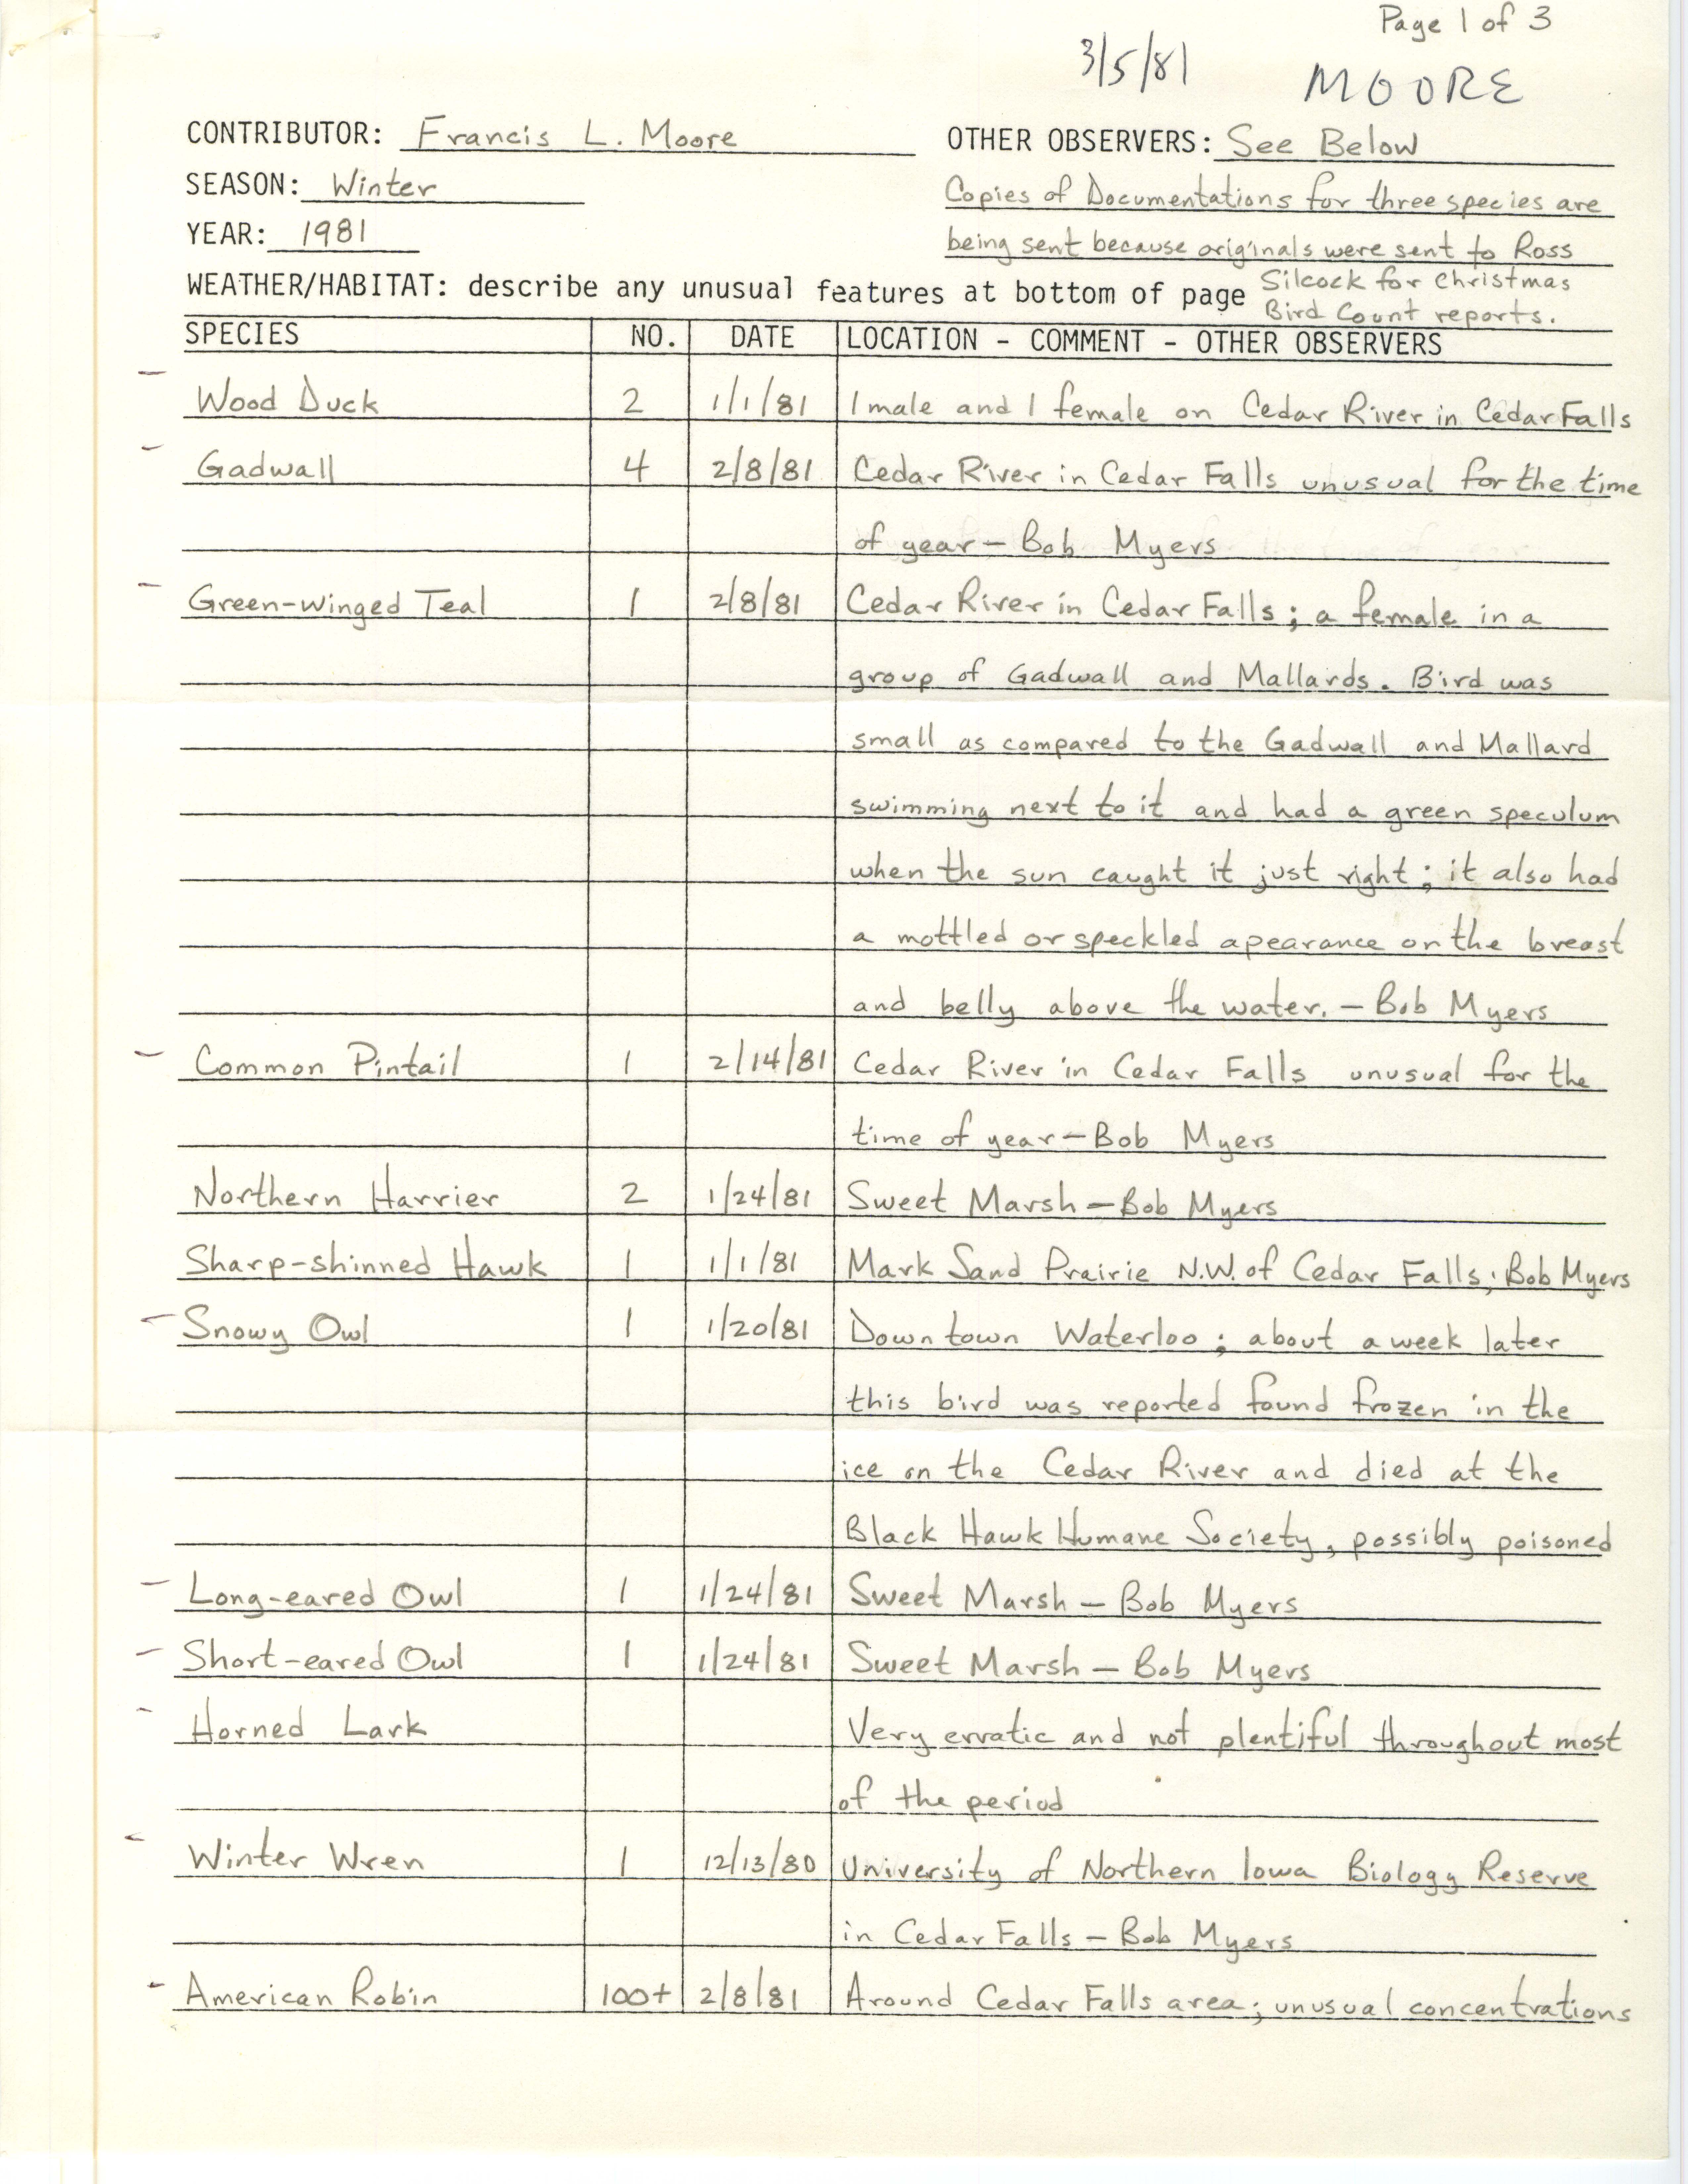 Annotated bird sighting list for winter 1980 and 1981 compiled by Francis L. Moore